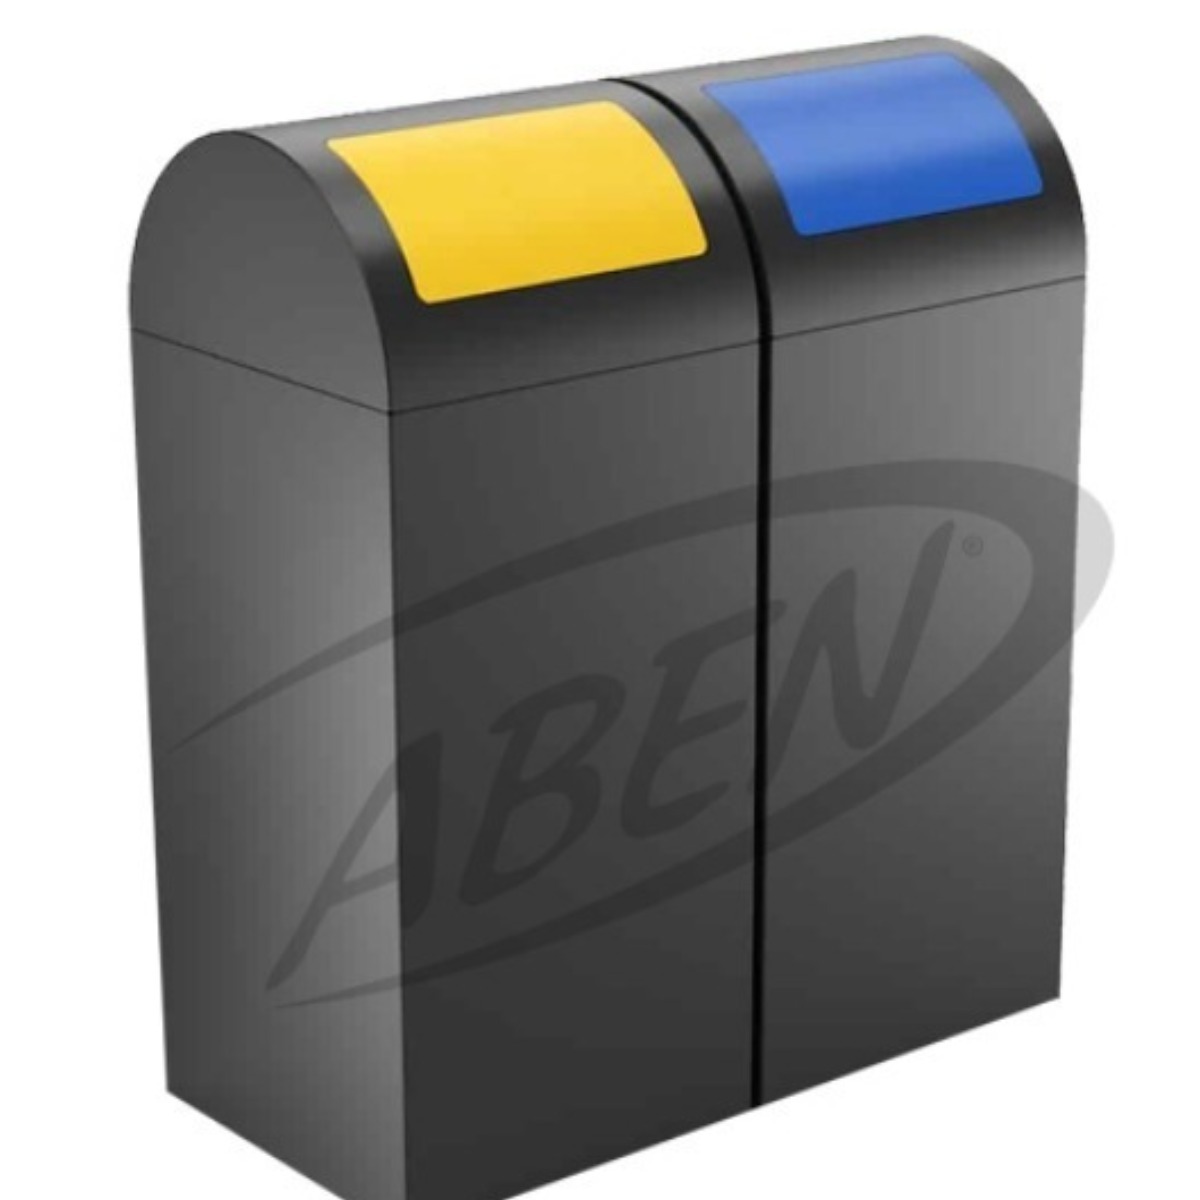 AB-763 2’Part Recycle Bin product logo